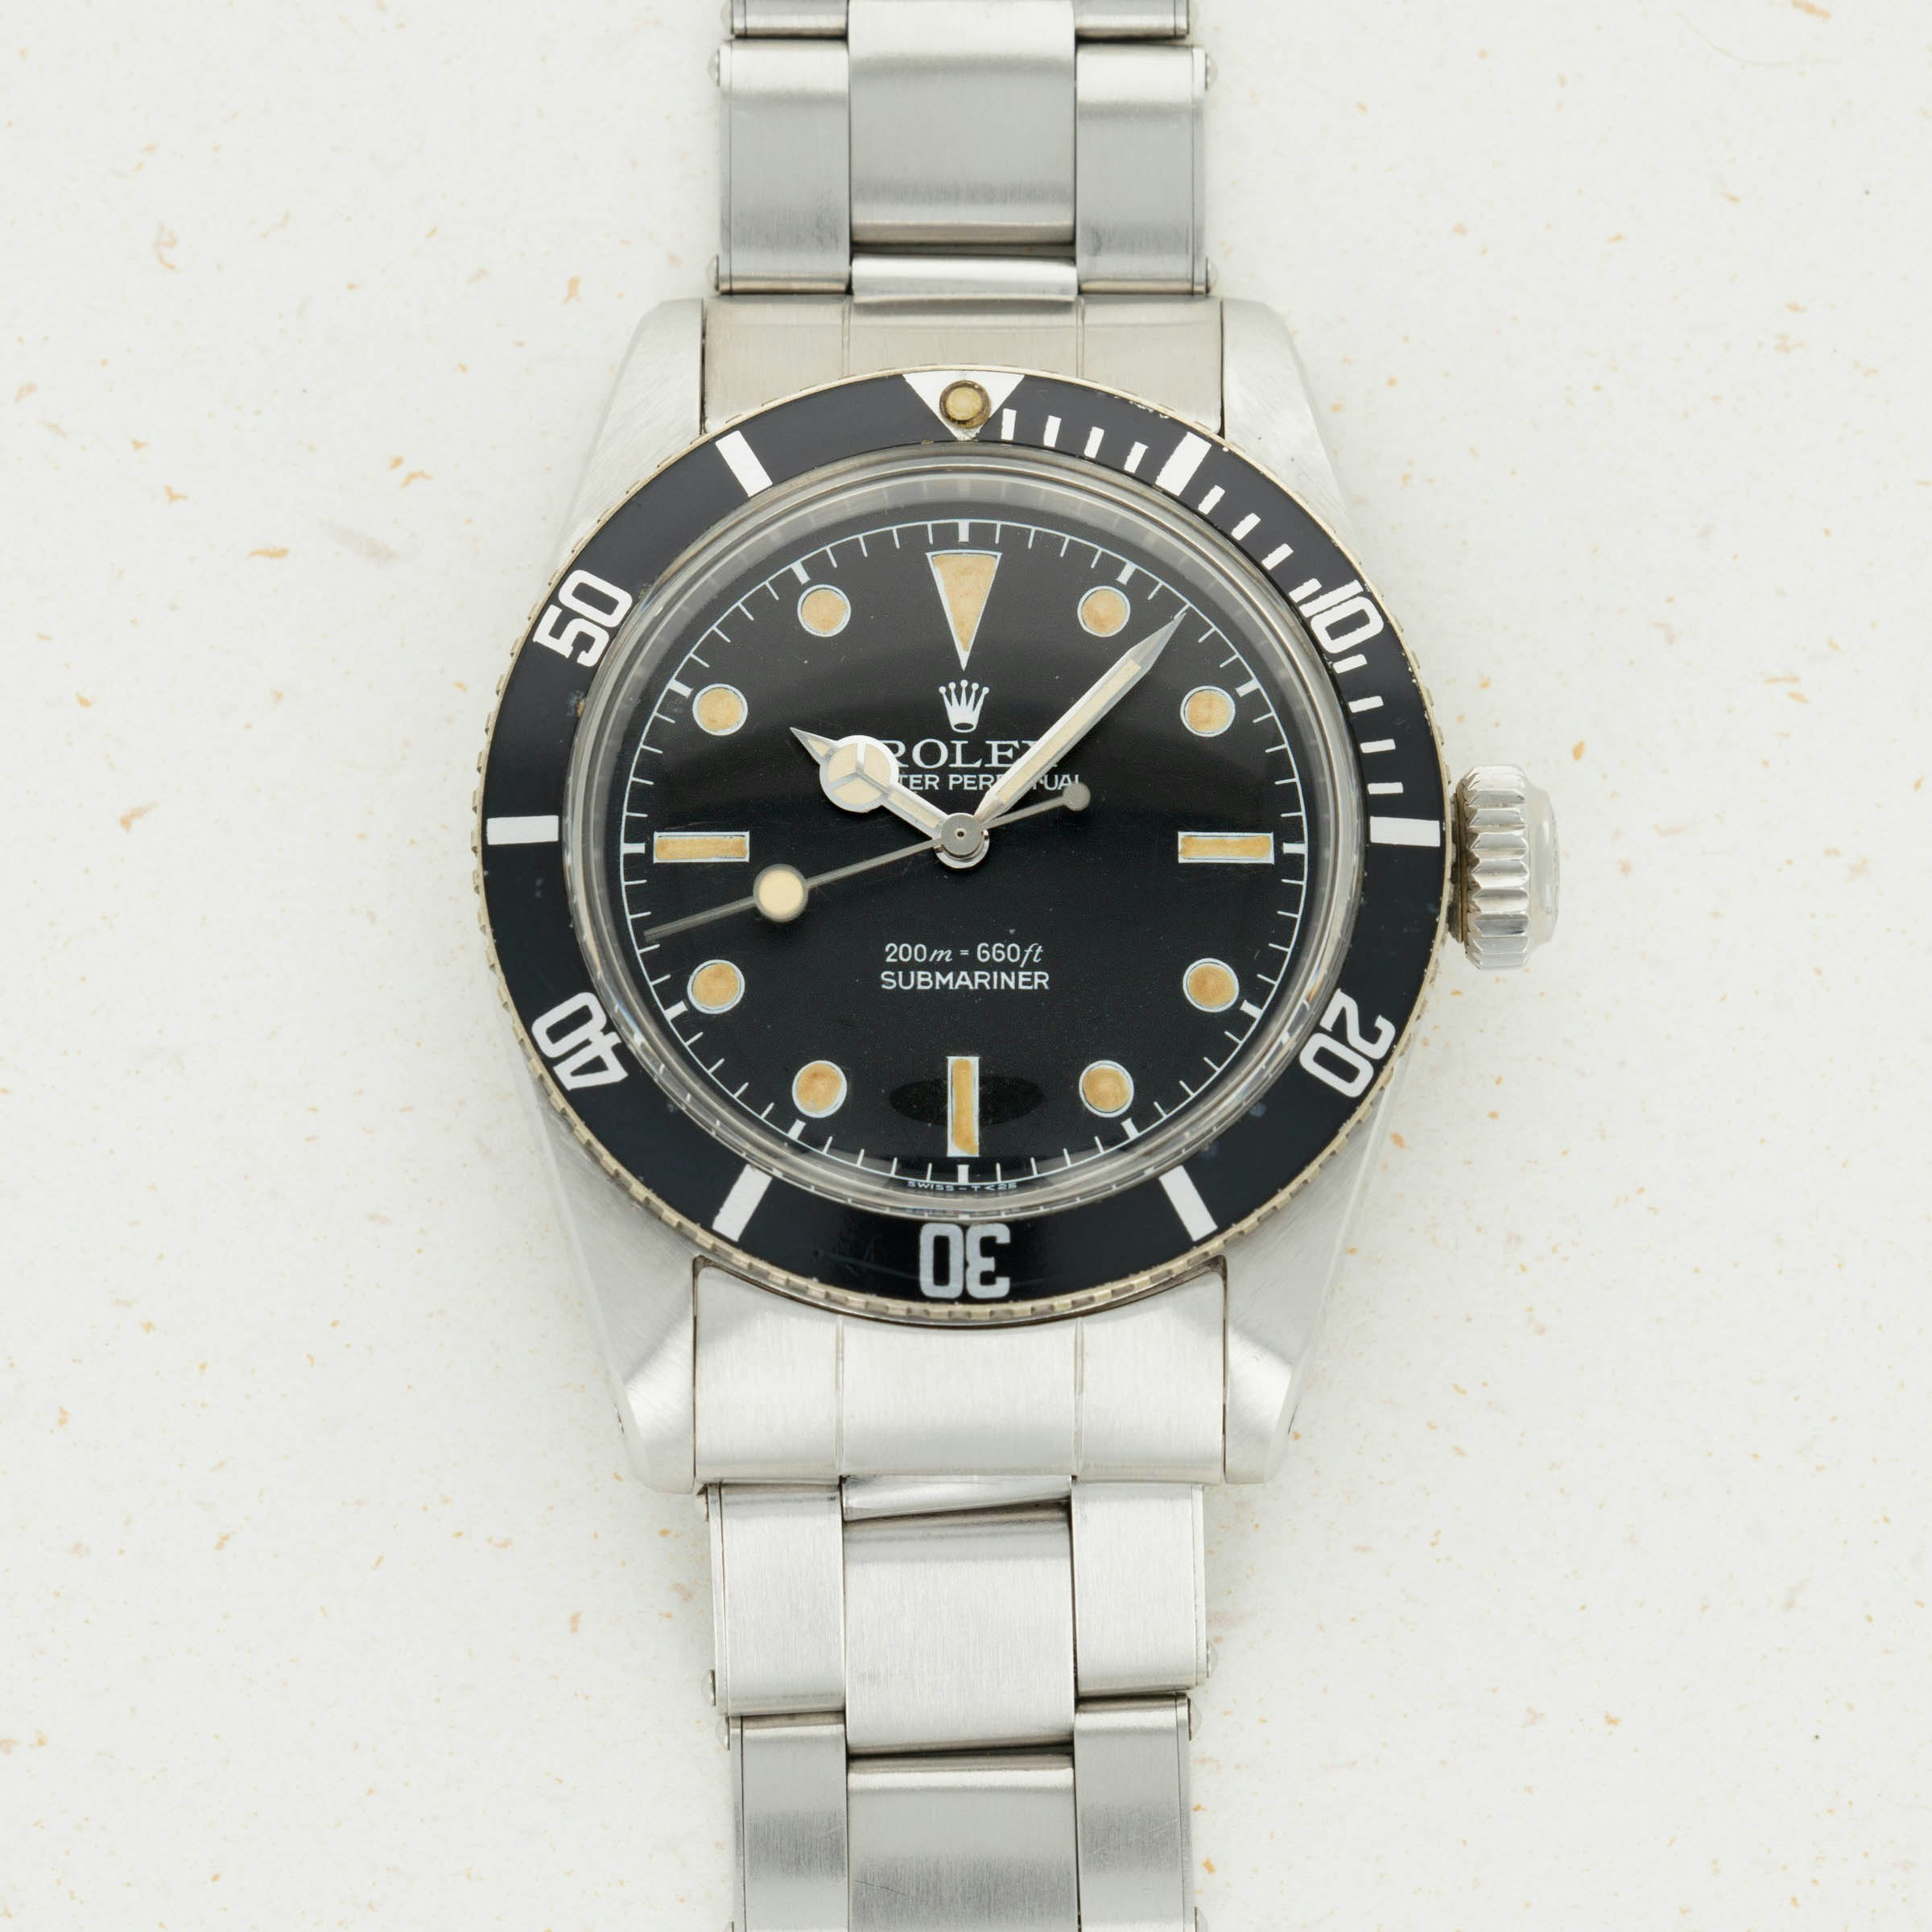 Thumbnail for Rolex 6538 Big Crown Submariner